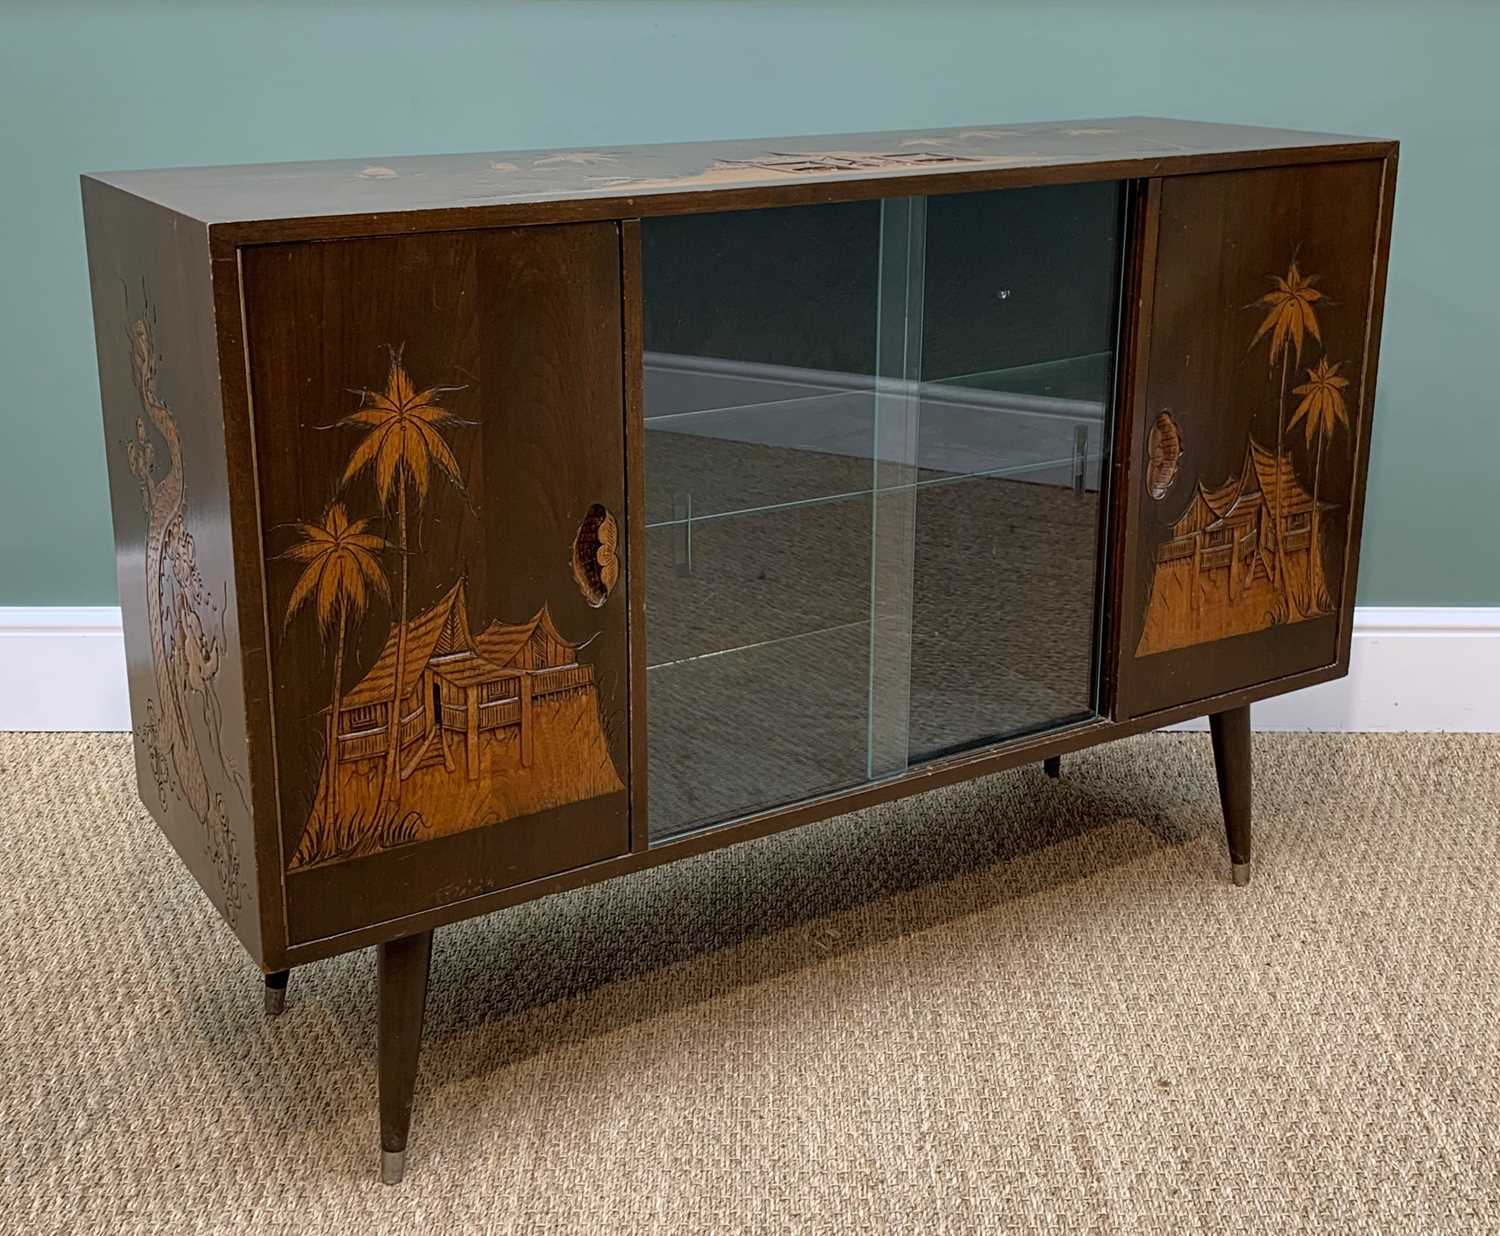 MID-CENTURY CHINOISERIE CARVED SIDEBOARD, central glass sliding doors with internal glass - Image 3 of 5